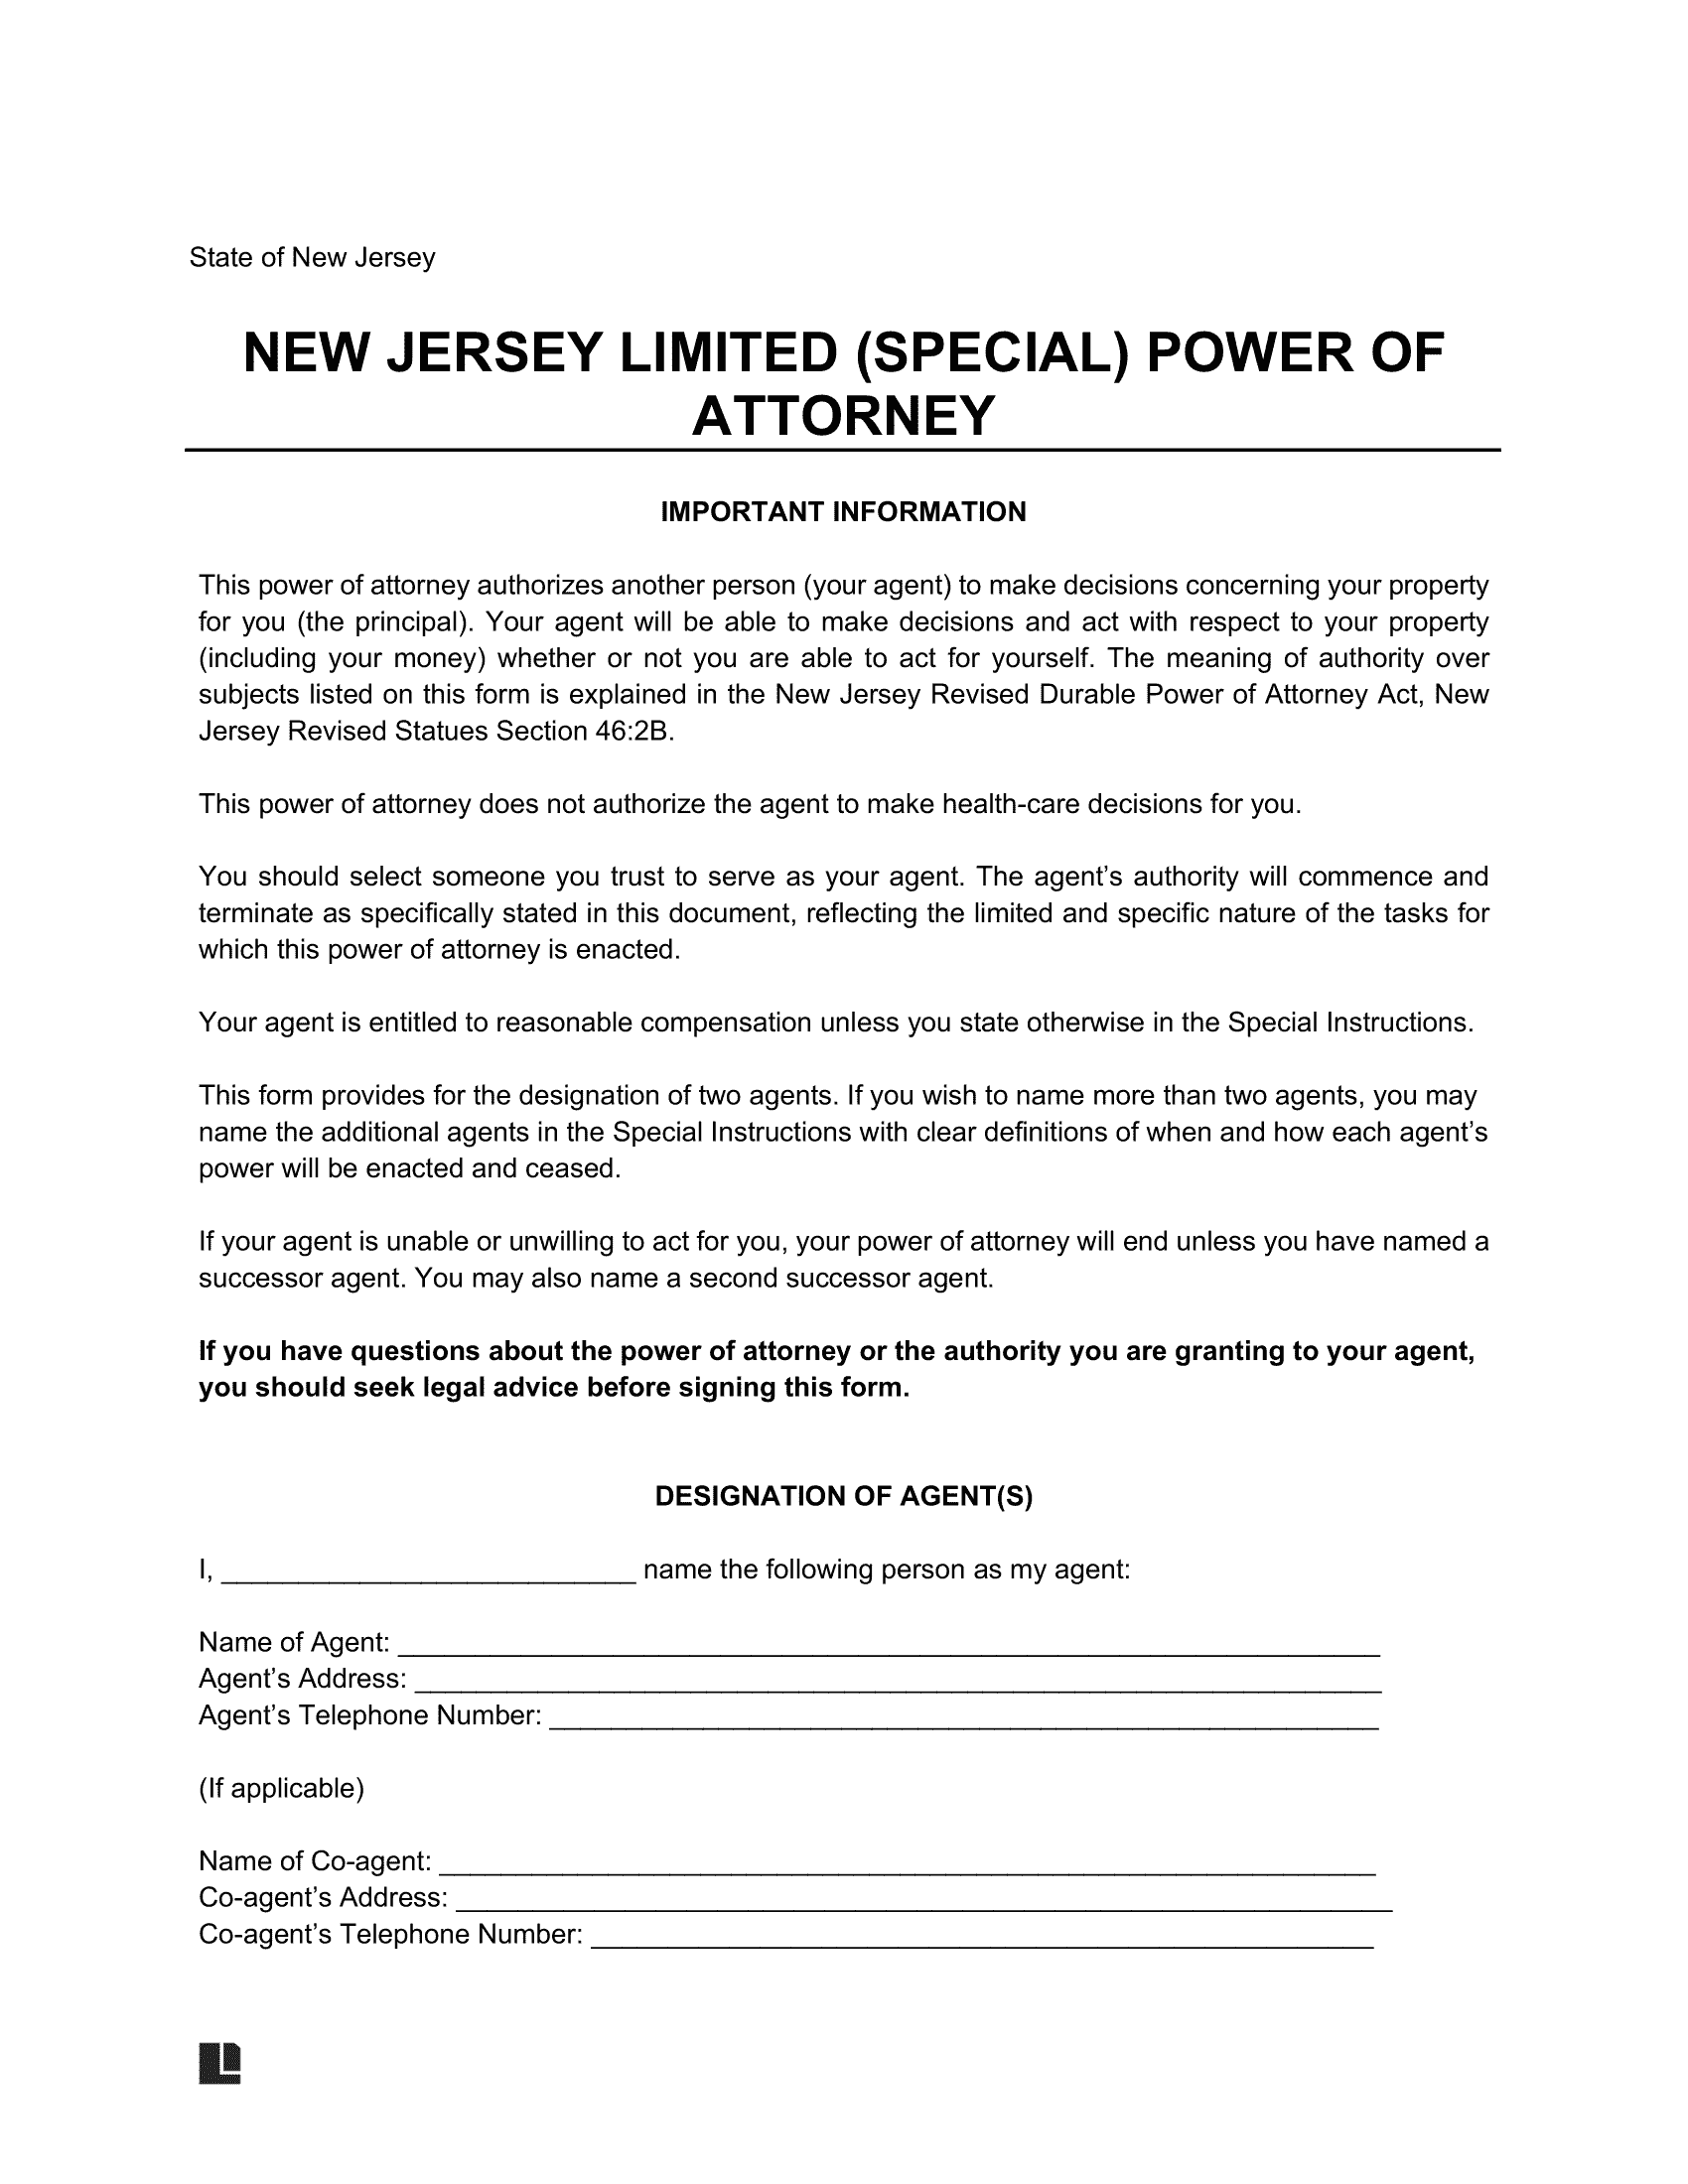 New Jersey Limited Power of Attorney Template